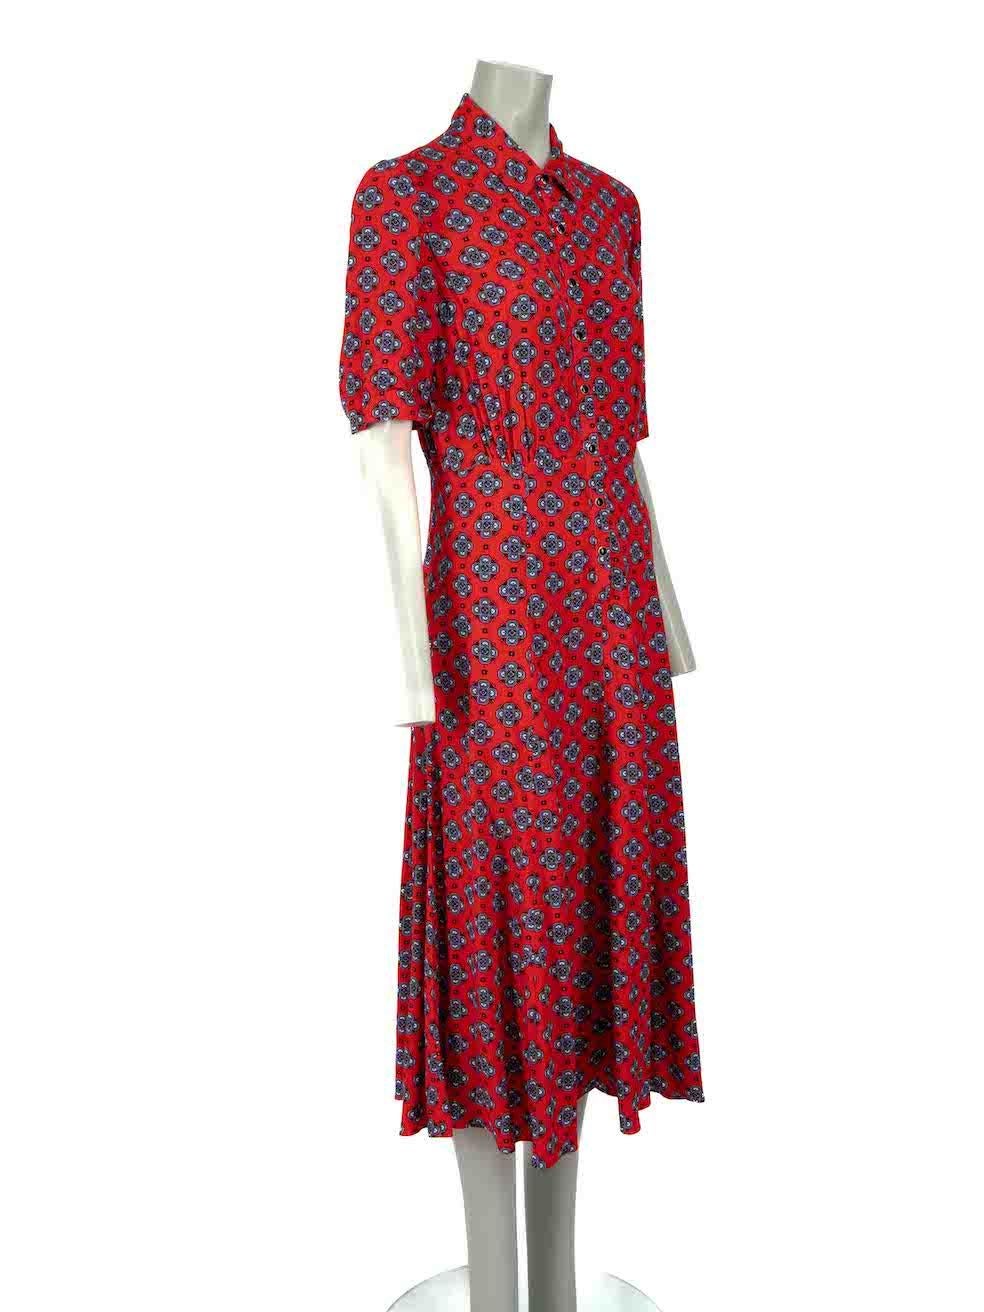 CONDITION is Good. Minor wear to dress is evident. Light wear to fabric surface with a couple of discoloured marks found at the centre front on this used Sandro designer resale item.
 
Details
Red
Viscose
Collared dress
Abstract motif pattern
Short